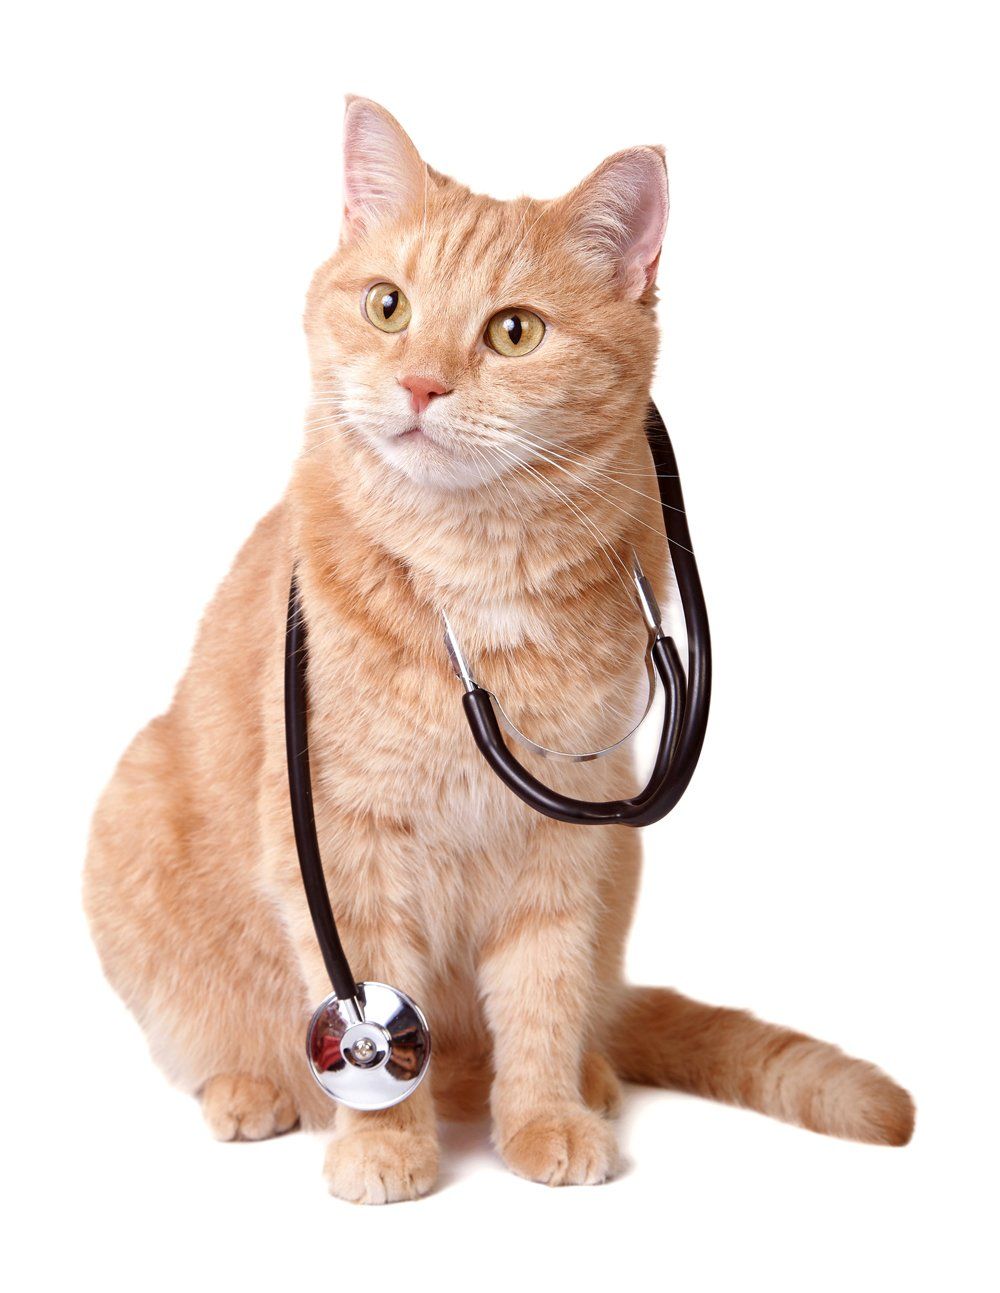 Emergencies — Cat With Stethoscope in South Gate, CA